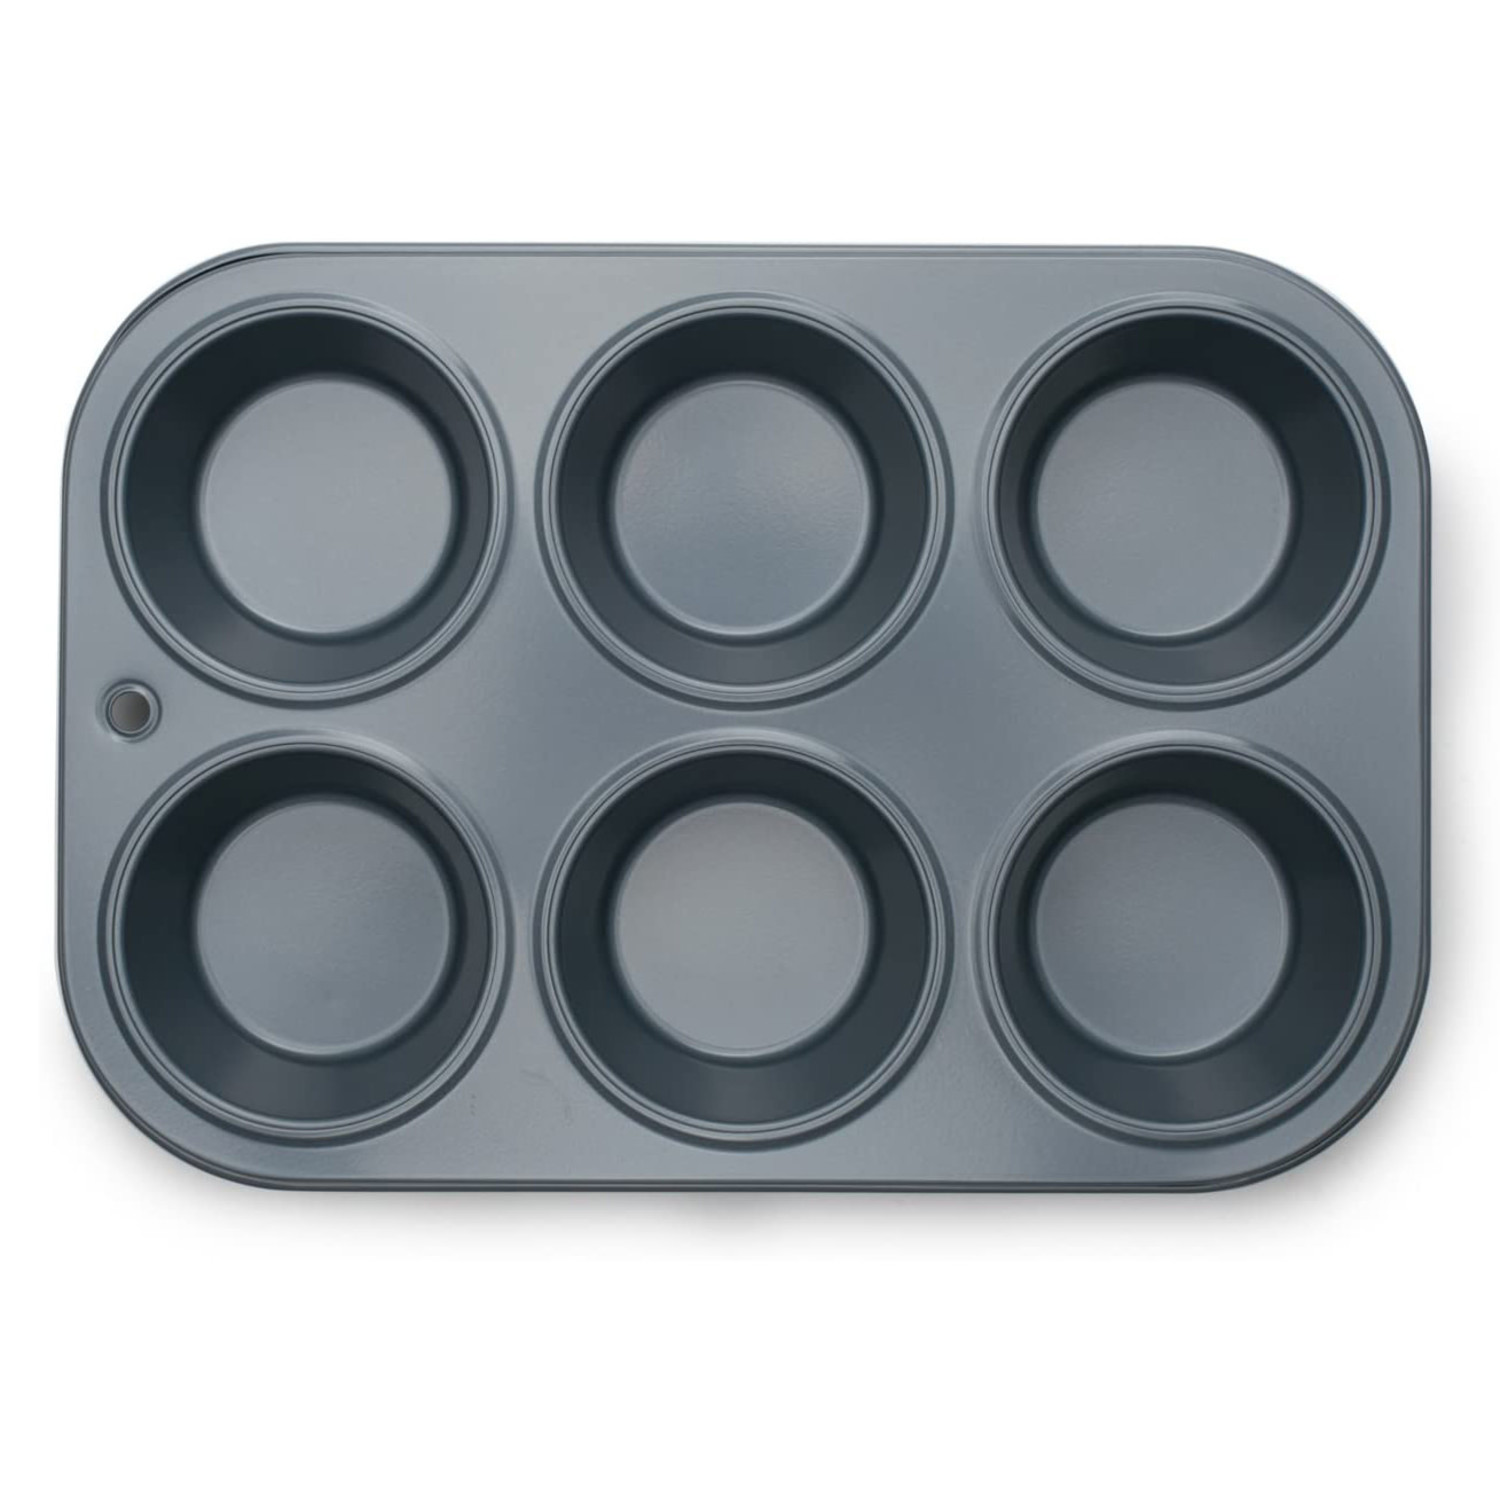  Fox Run 4867 Muffin Pan, 6 Cup, Stainless Steel: Stainless  Steel Muffin Tin For Large Muffins: Home & Kitchen